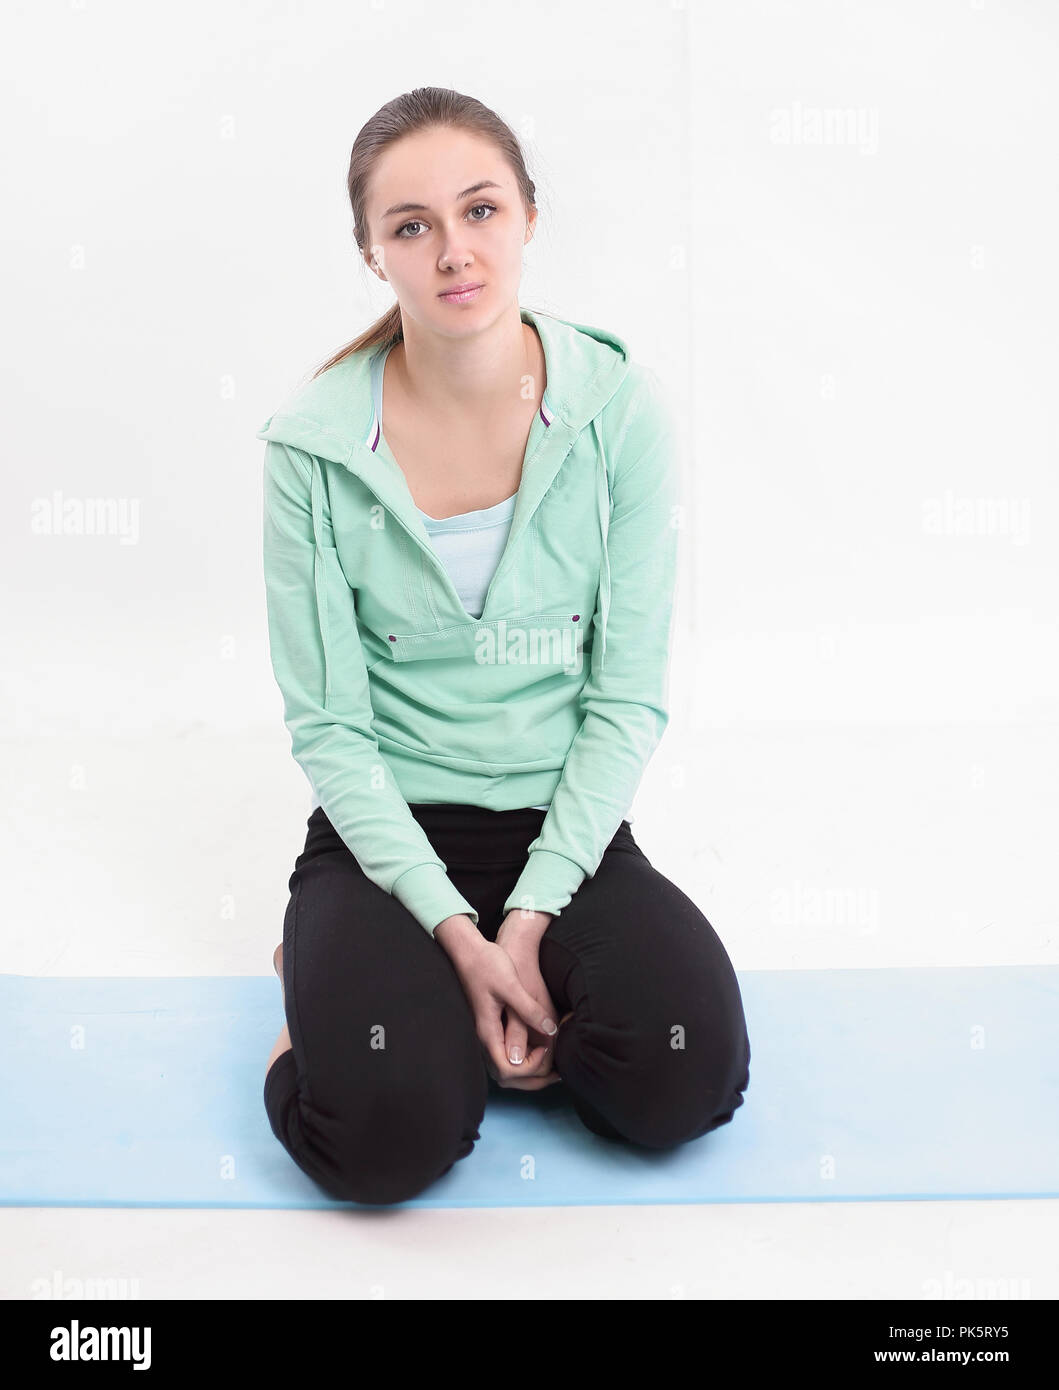 Sad Beautiful Young Woman Full Body Stock Photo, Picture and Royalty Free  Image. Image 38403646.